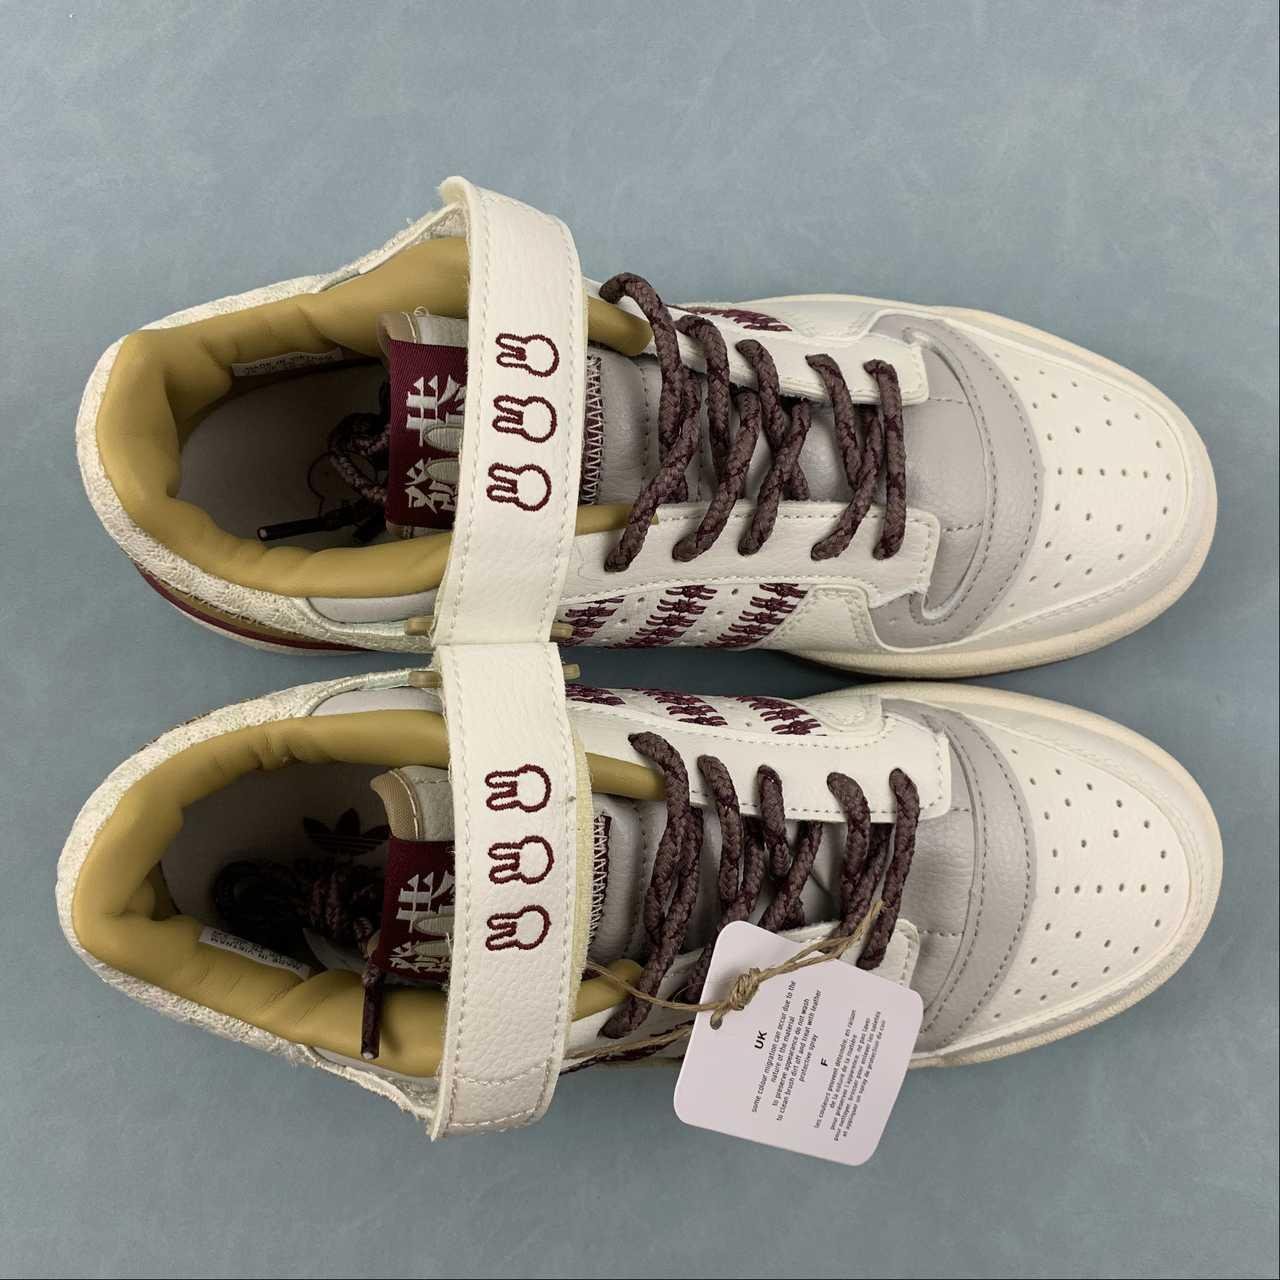        Forum 84 Campus casual sneakers IE1898 3